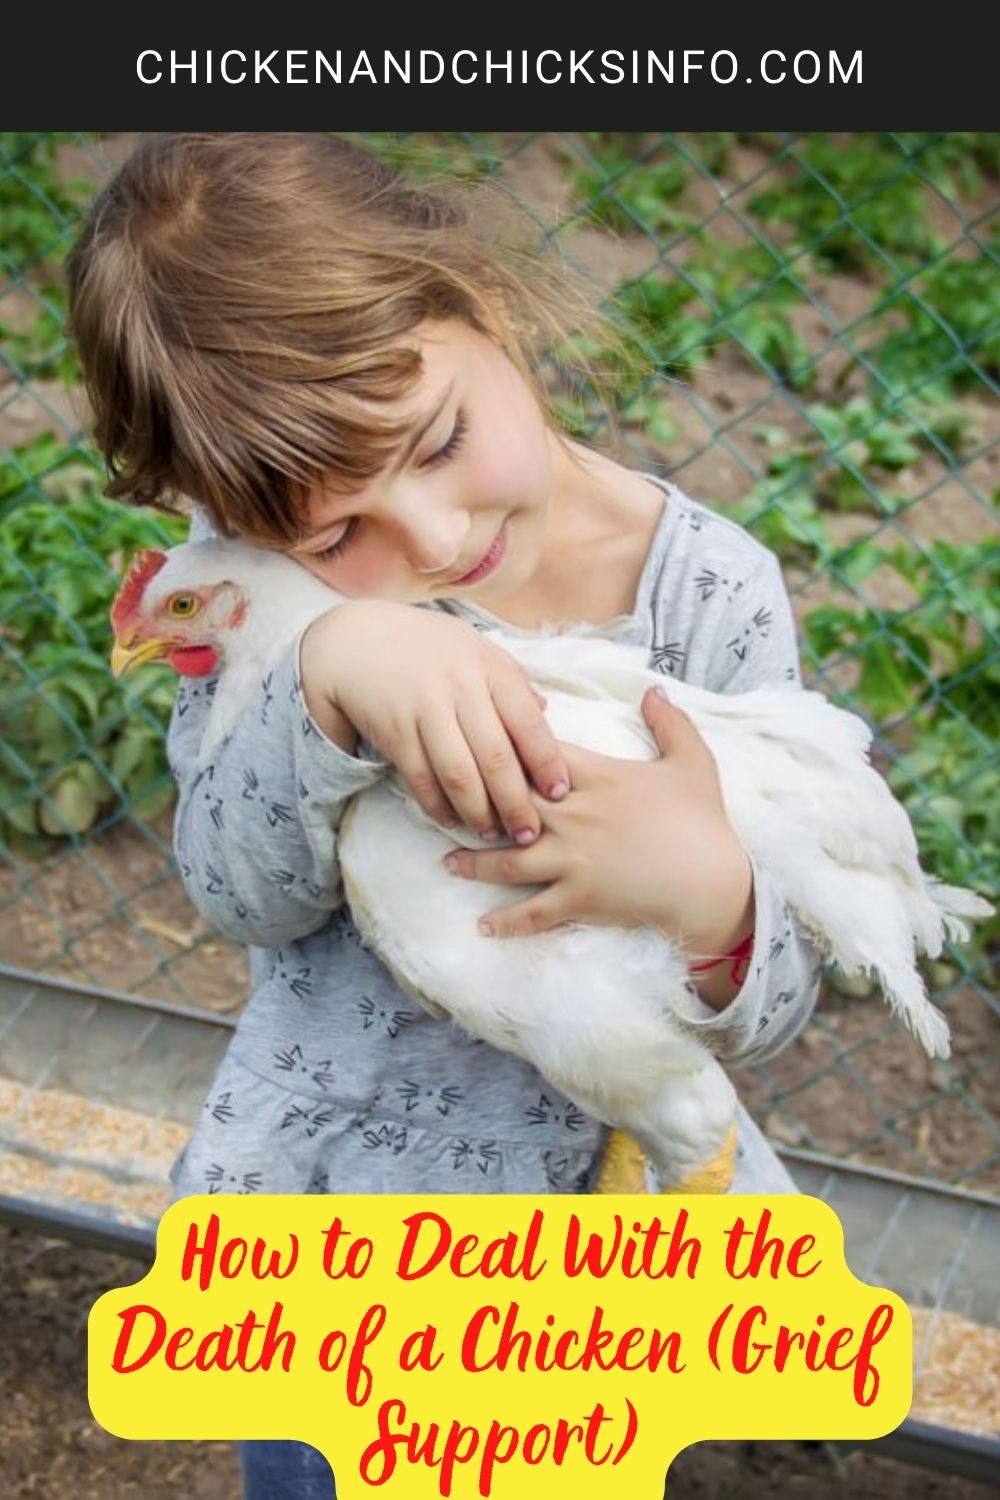 How to Deal With the Death of a Chicken (Grief Support) poster.
